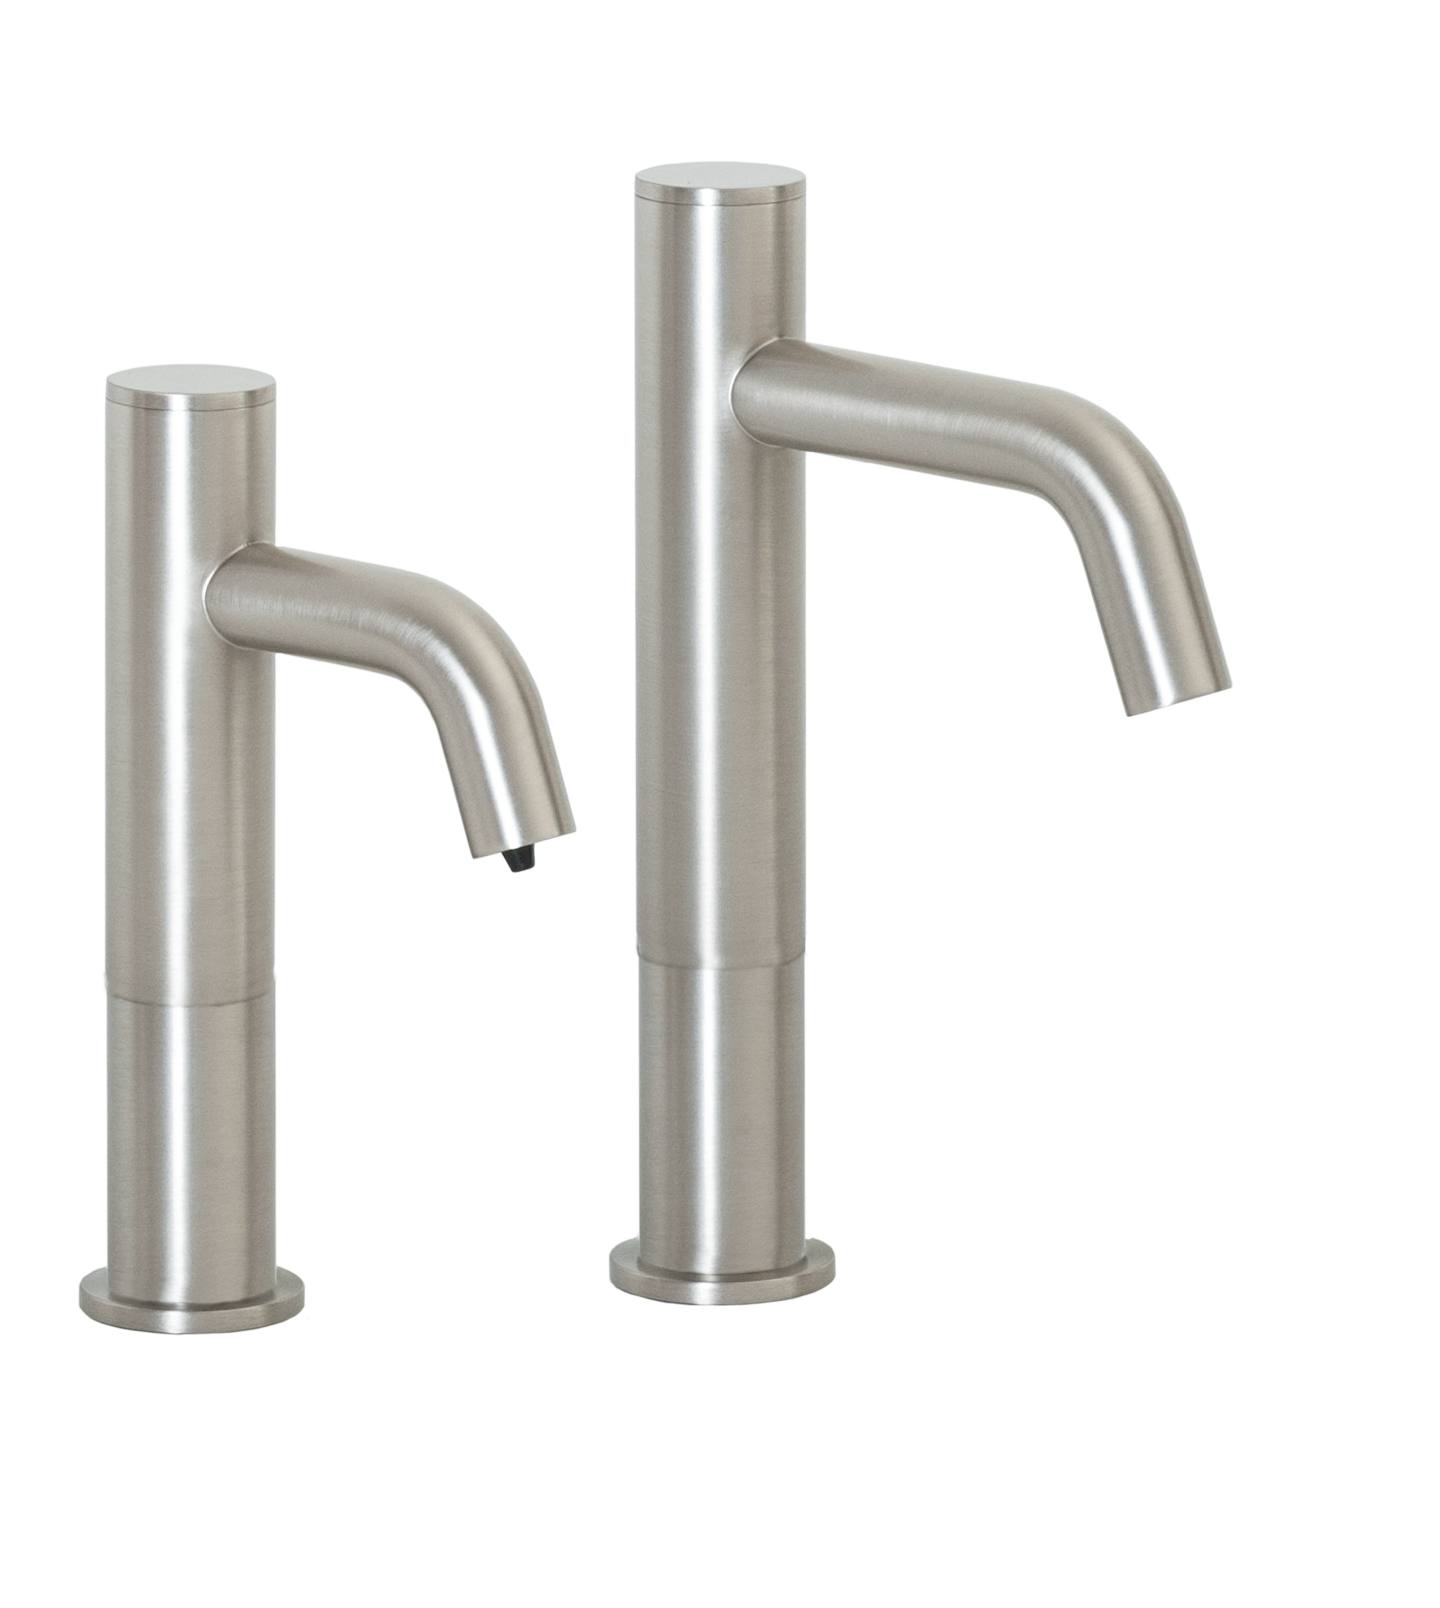 MP3263 Automatic Hands-Free Faucet with 6” Spout Reach, 3” Riser and Automatic Soap Dispenser with 32oz. Bottle In Satin Nickel